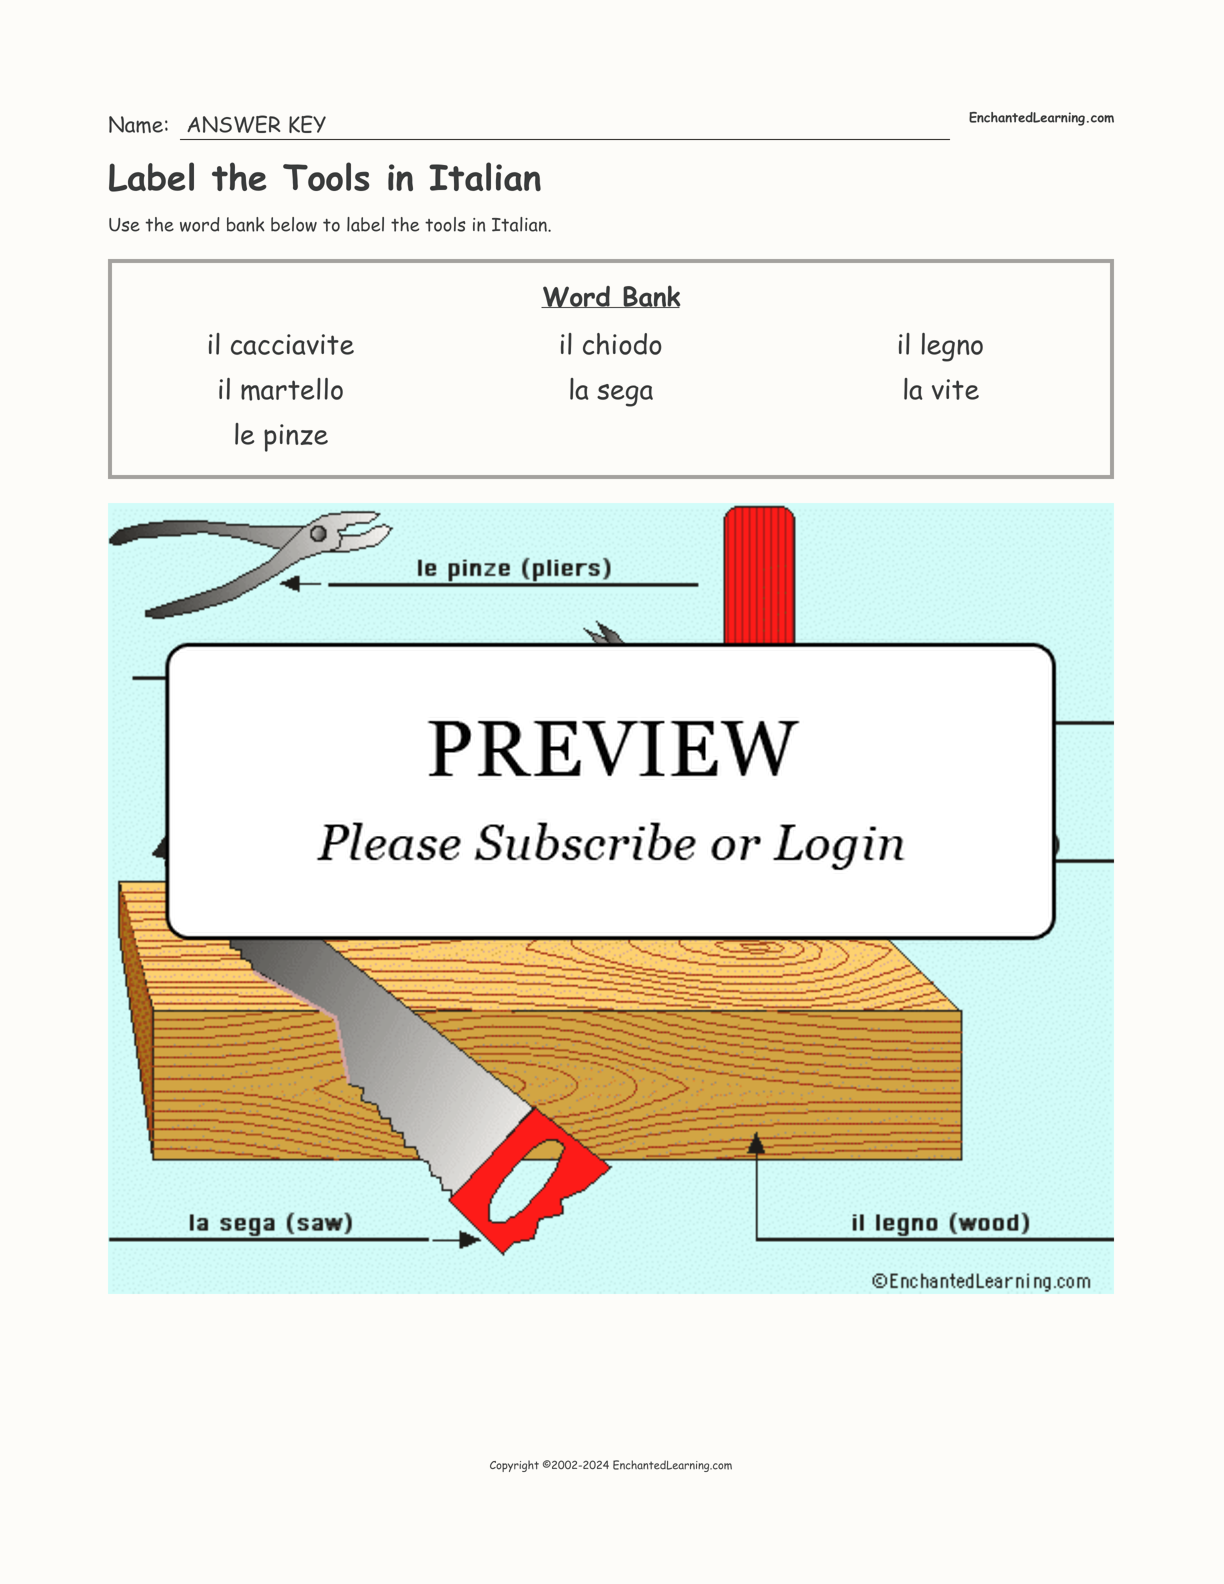 Label the Tools in Italian interactive worksheet page 2